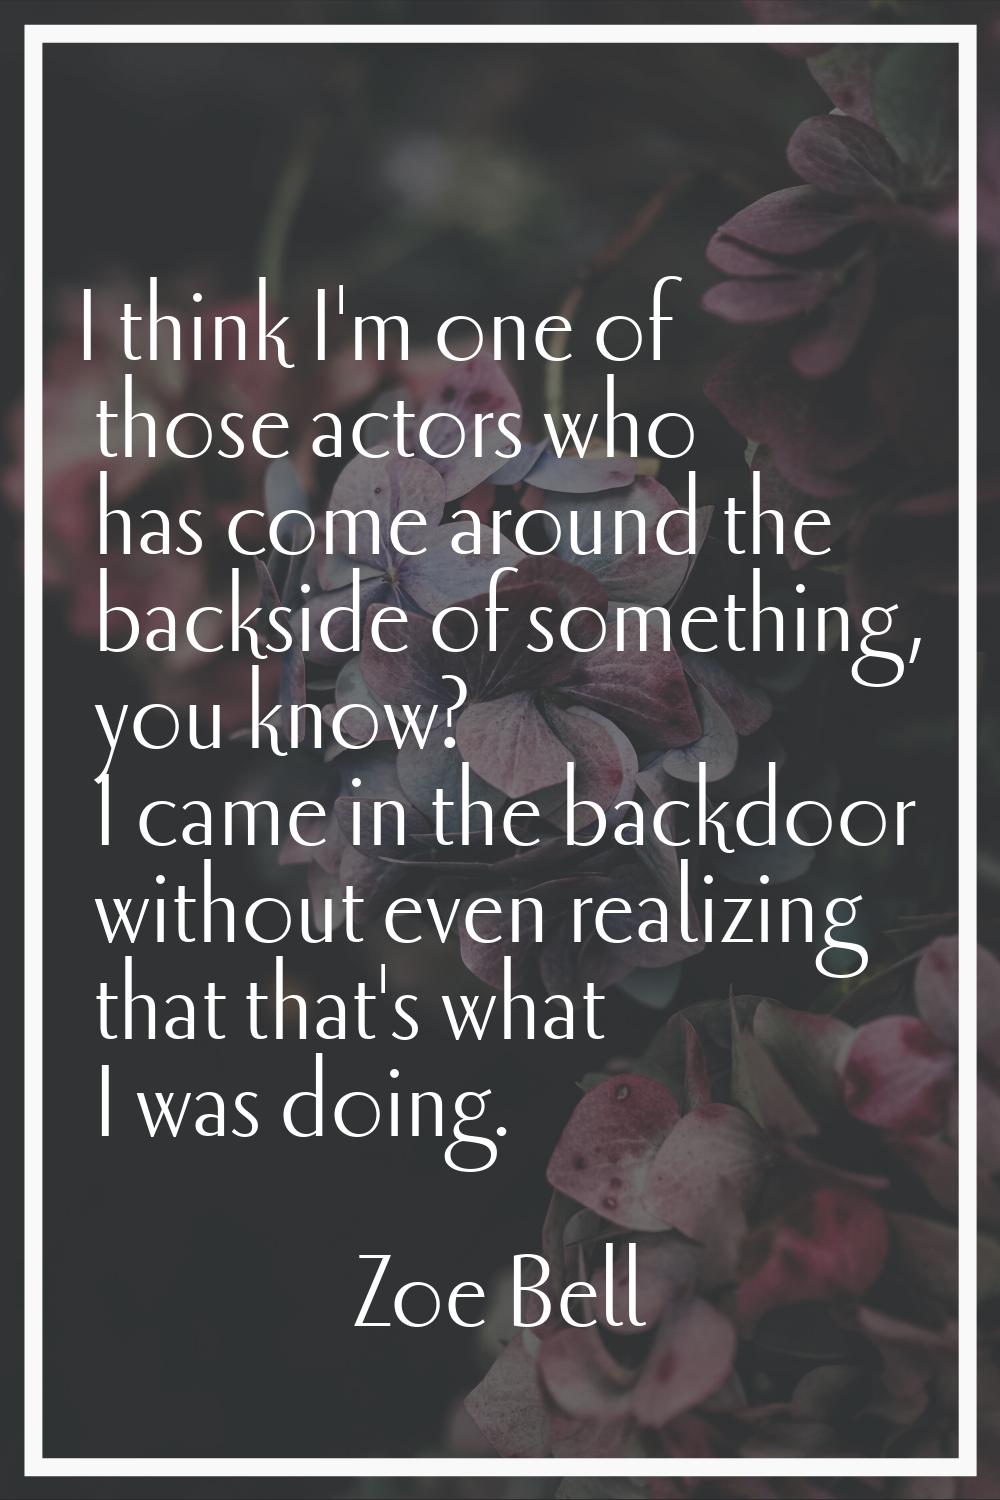 I think I'm one of those actors who has come around the backside of something, you know? I came in 